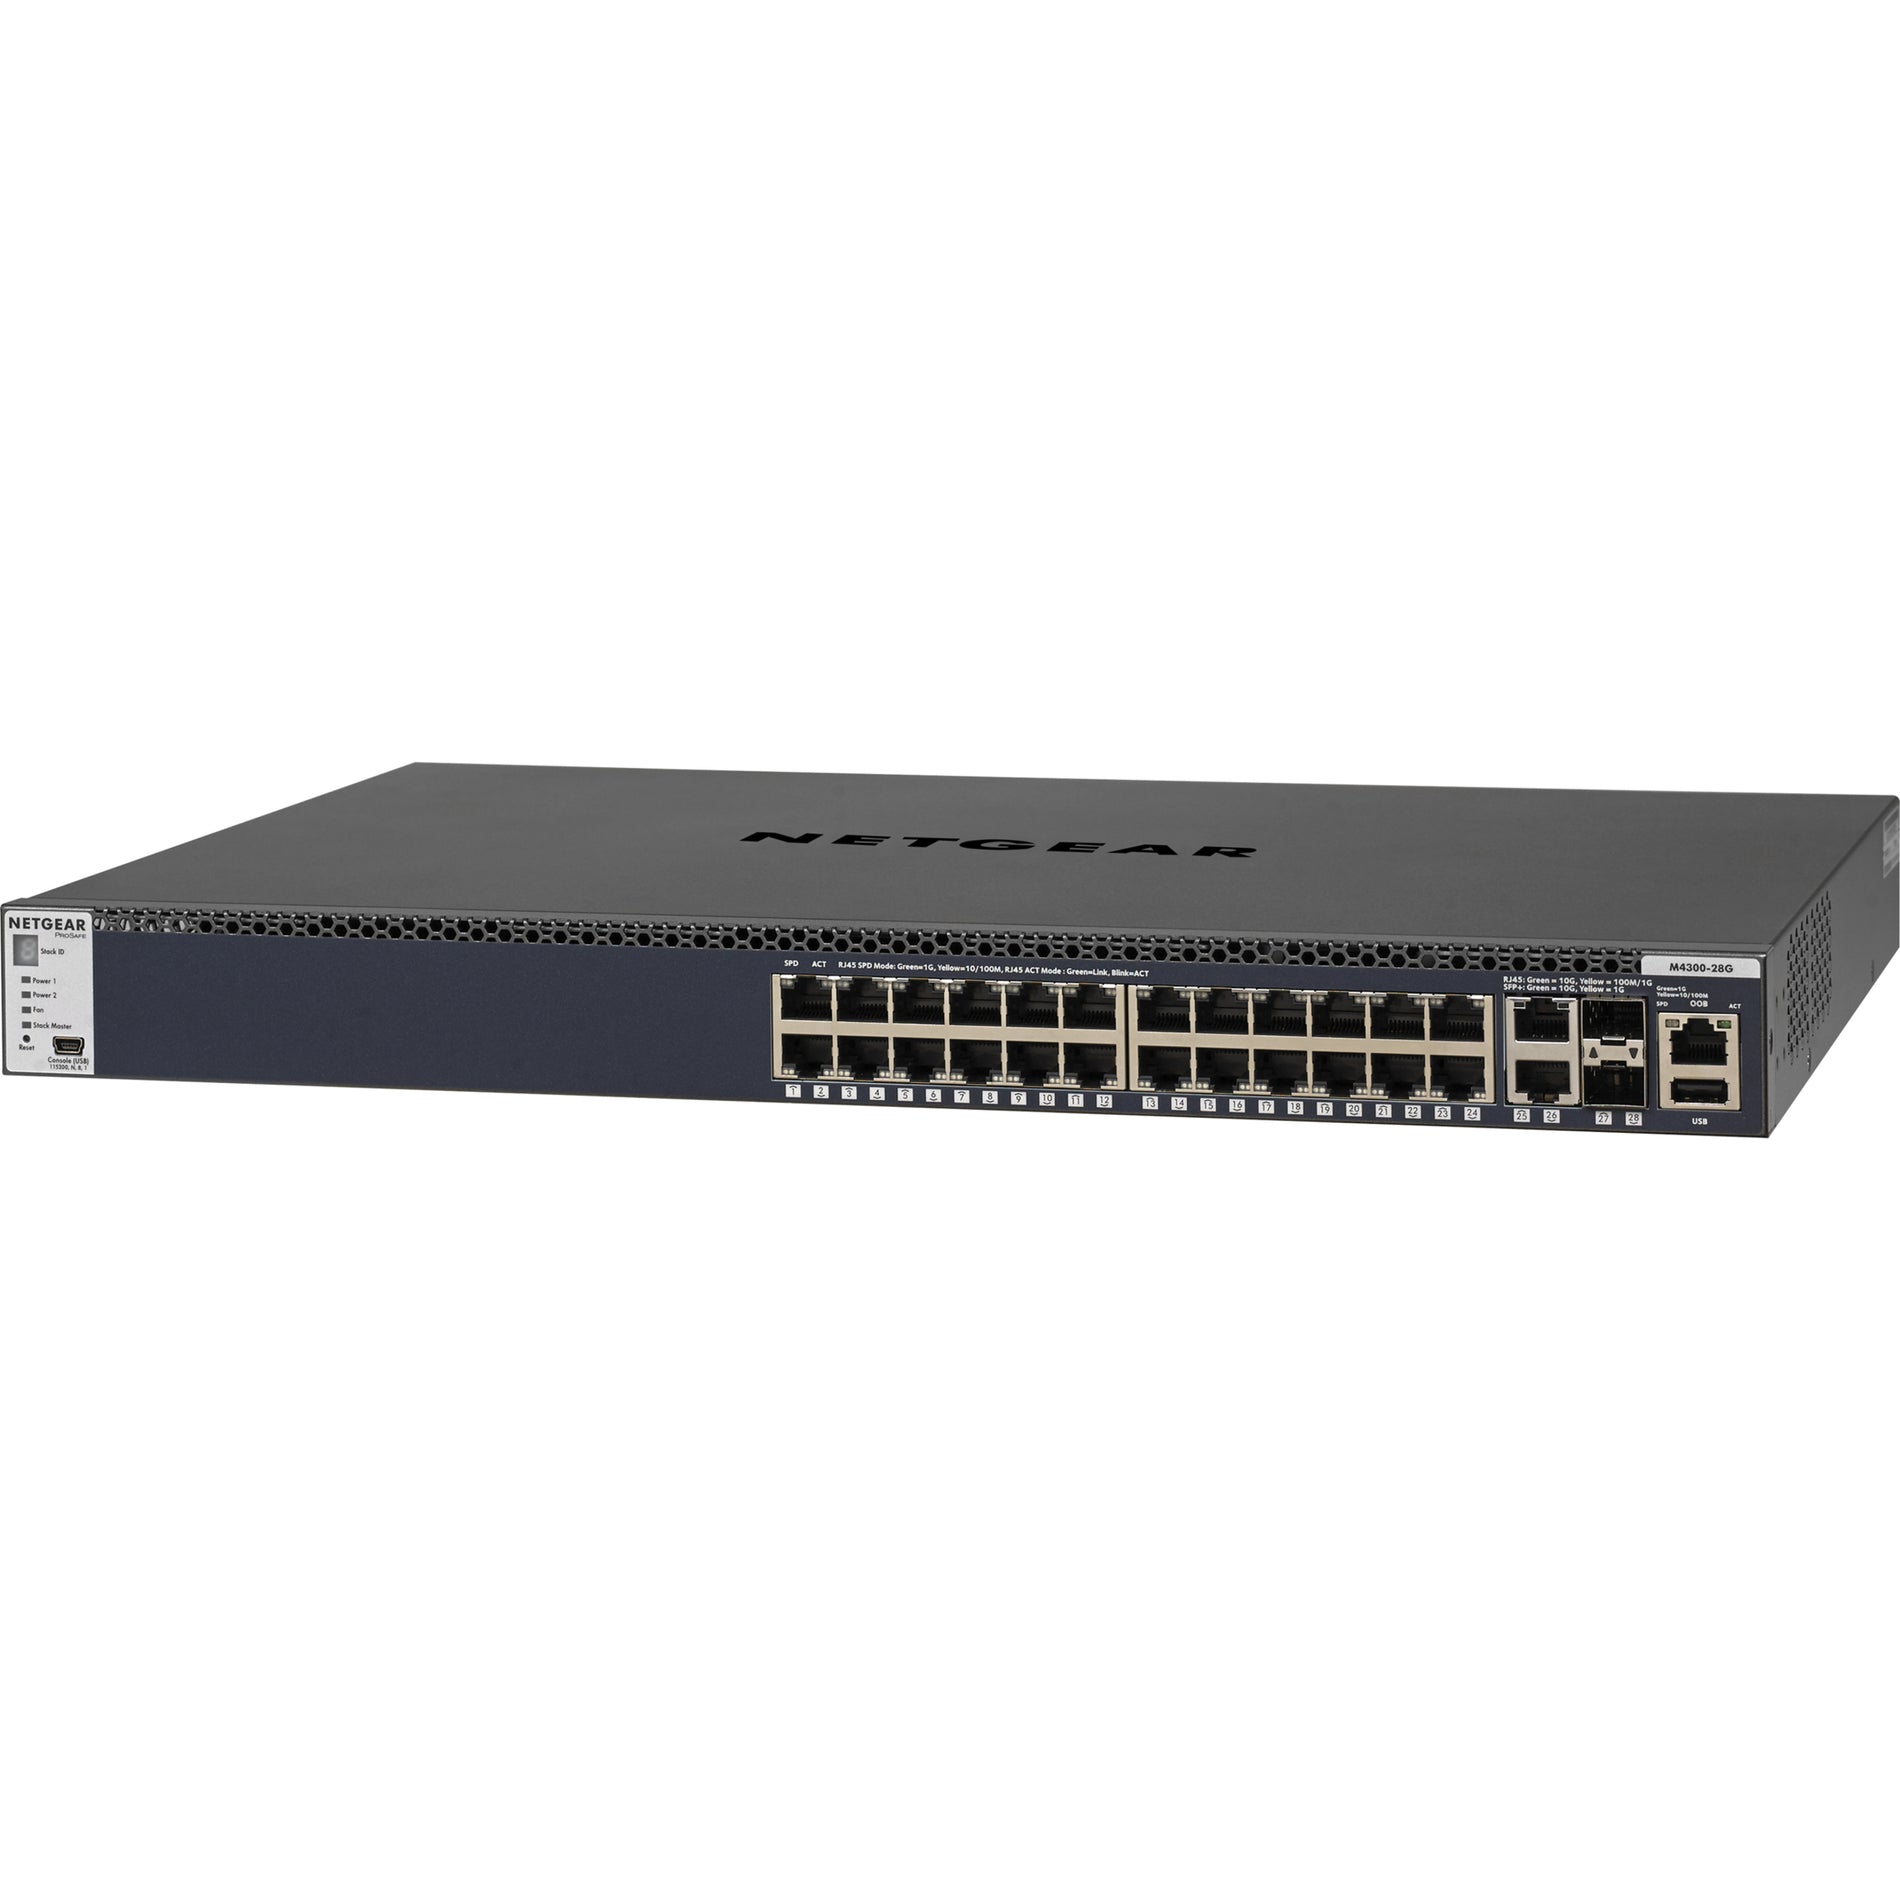 Netgear: ネットギア GSM4328S-100NES: GSM4328S-100NES M4300-28G: M4300-28G ProSafe: プロセーフ Managed Switch: 管理スイッチ 1G: 1G Stackable: スタッカブル 2x10GBASE-T: 2x10GBASE-T 2xSFP+: 2xSFP+ Layer 3 Switch: レイヤー3スイッチ